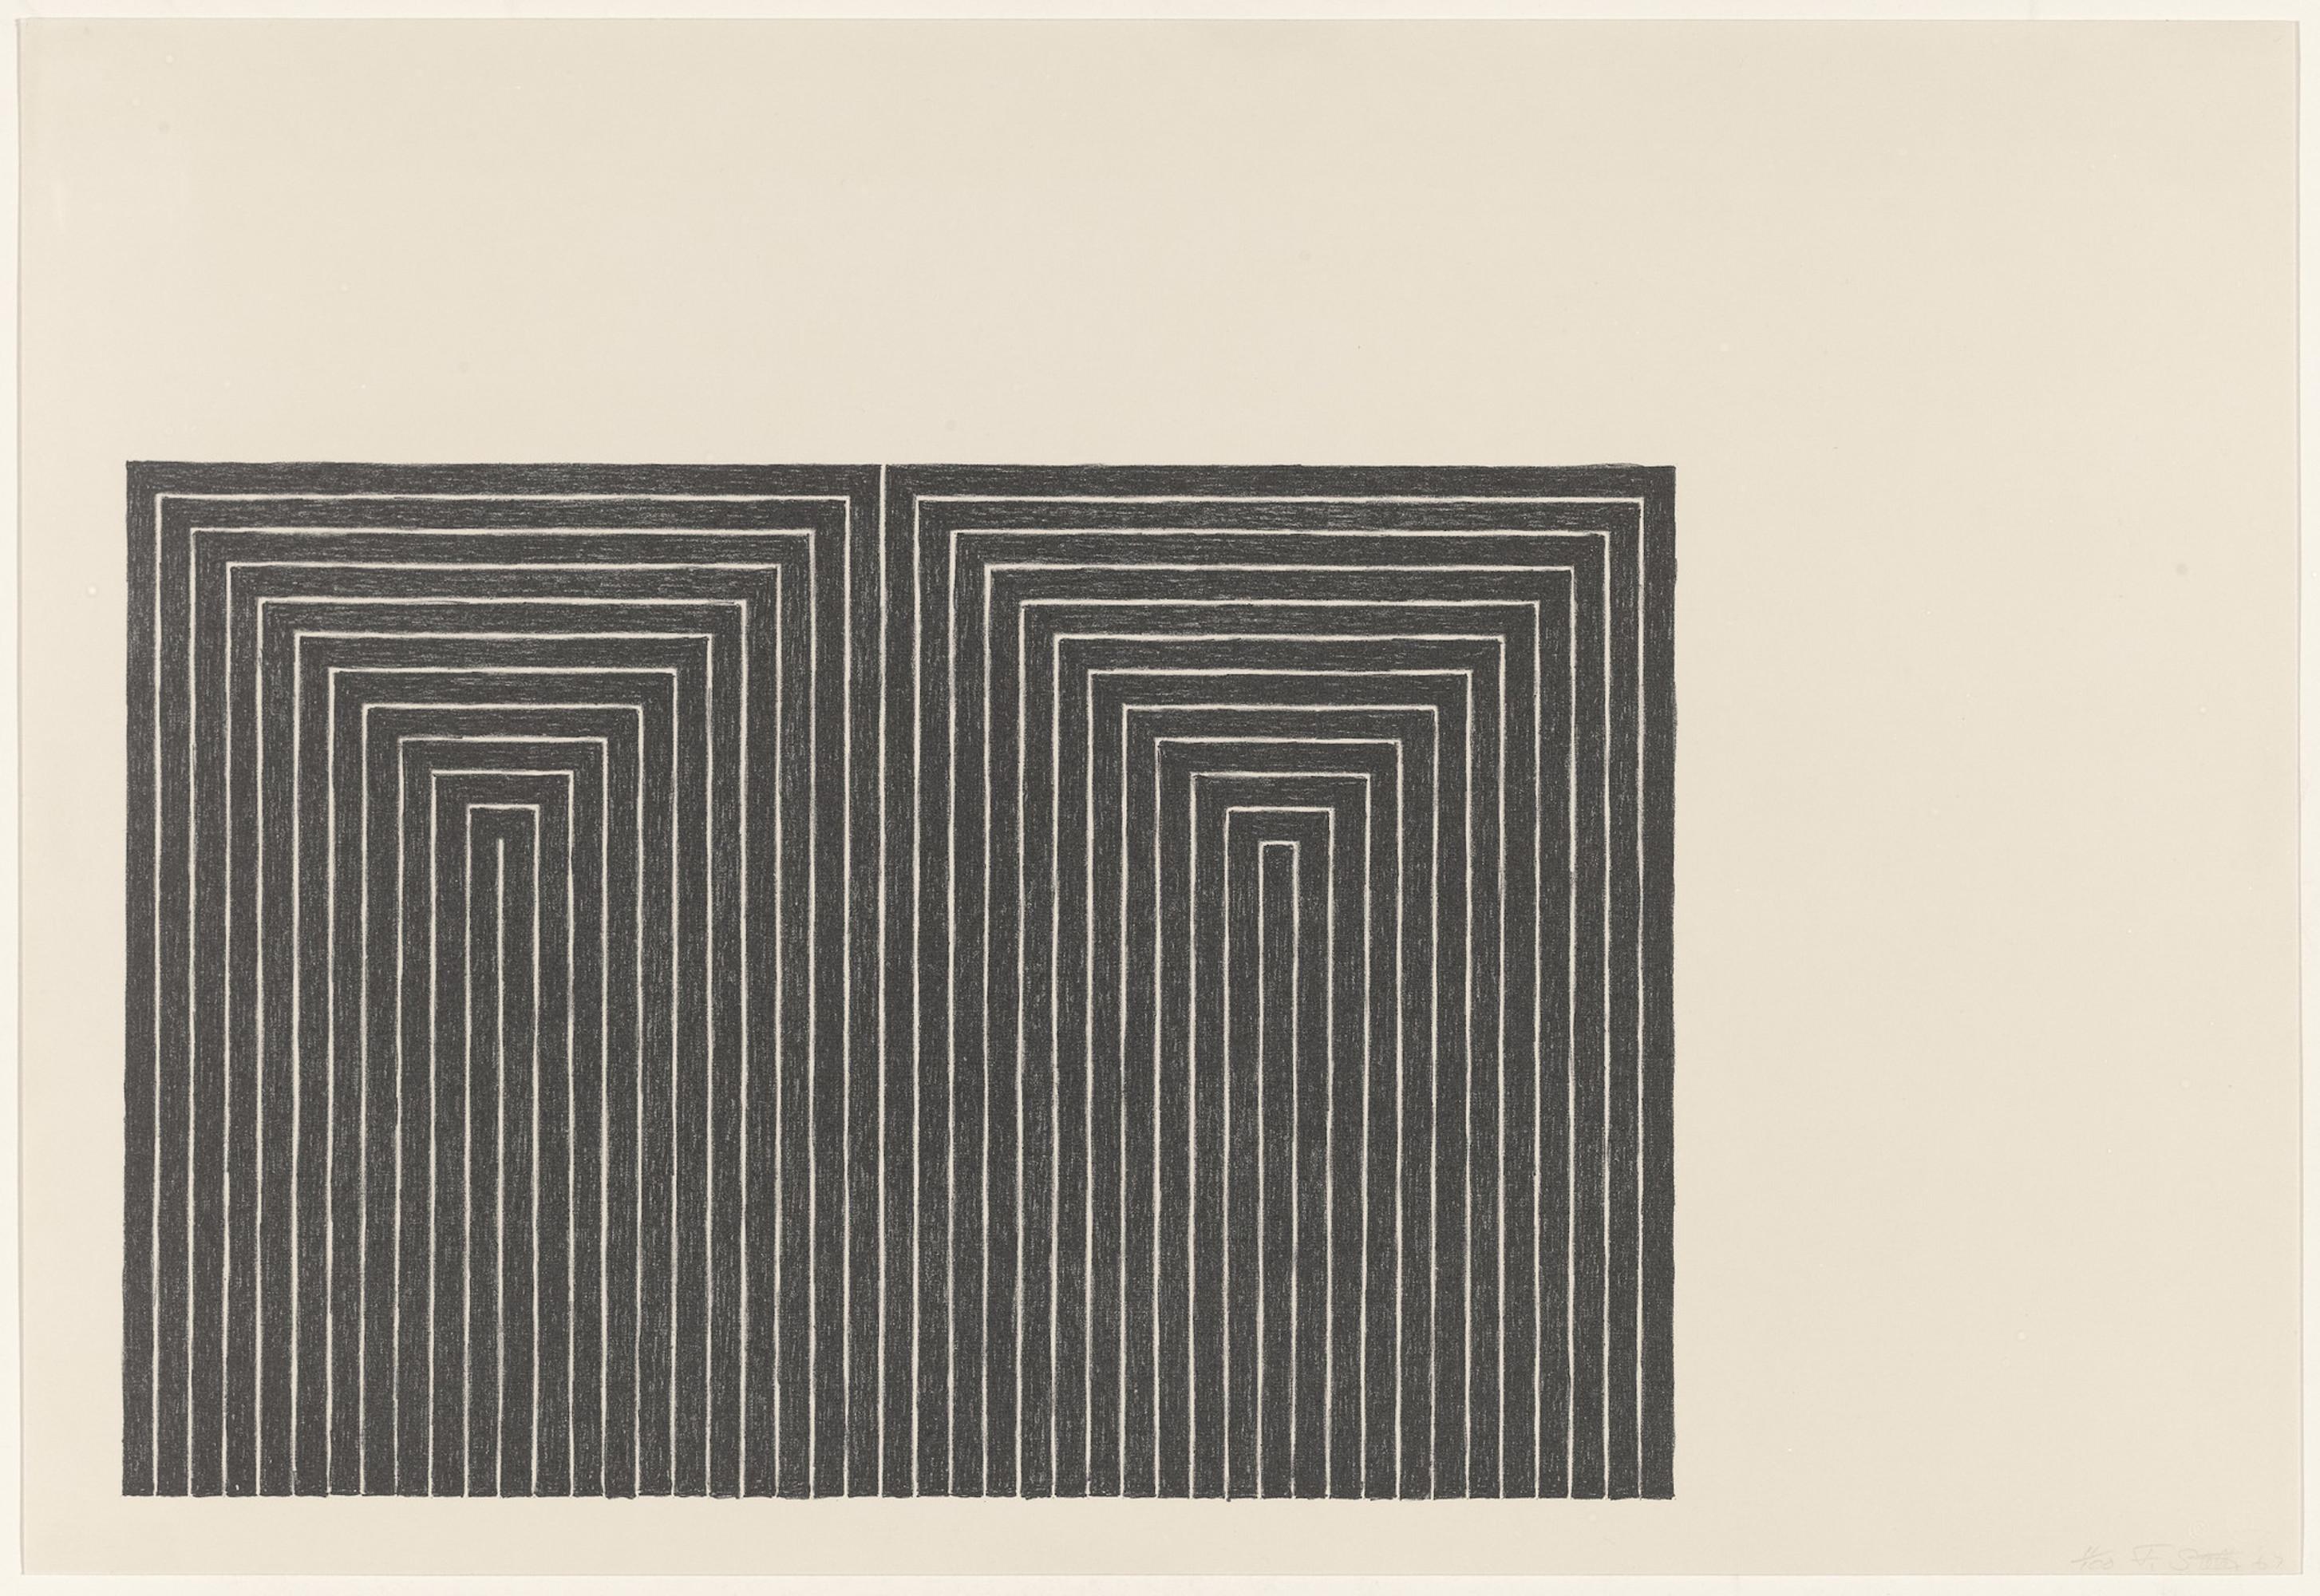 FRANK STELLA (1936-Present)

Lithograph in black on J. Barcham Green wove paper, conceived in 1967, from the portfolio of 9 lithographs 'Black Series I'. Signed, dated and numbered 70 from the edition of 100 prints. Published by Gemini G.E.L., Los